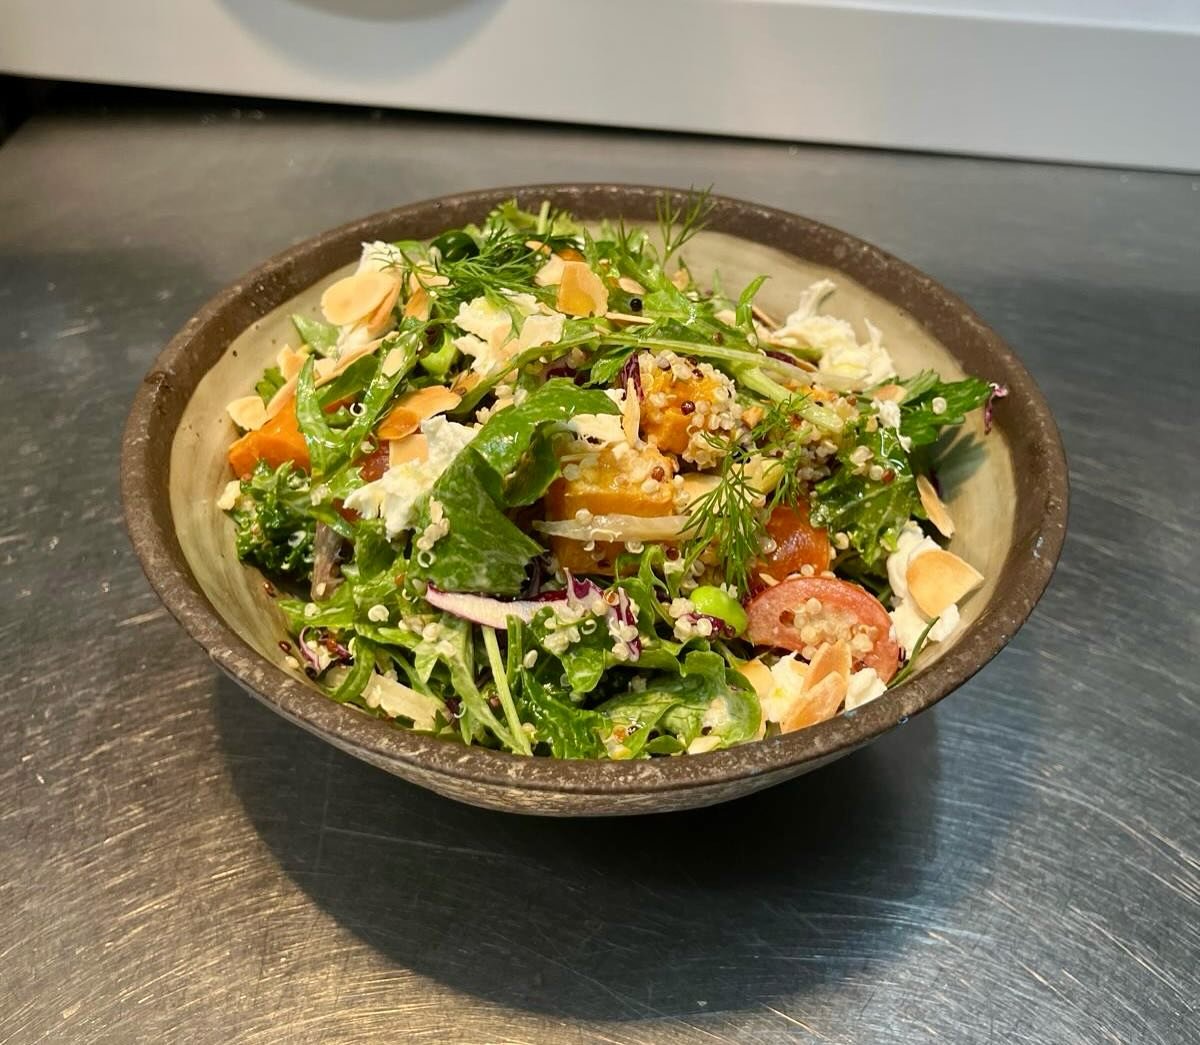 Our new Roast Pumpkin Salad is perfect for Autumn lunches. 🍁

Featuring quinoa, edamame, tomato, kale, red cabbage, pickled fennel, parsley, dill, feta, roasted almonds &amp; citrus tahini dressing. Add poached chicken or smoked salmon. 👌